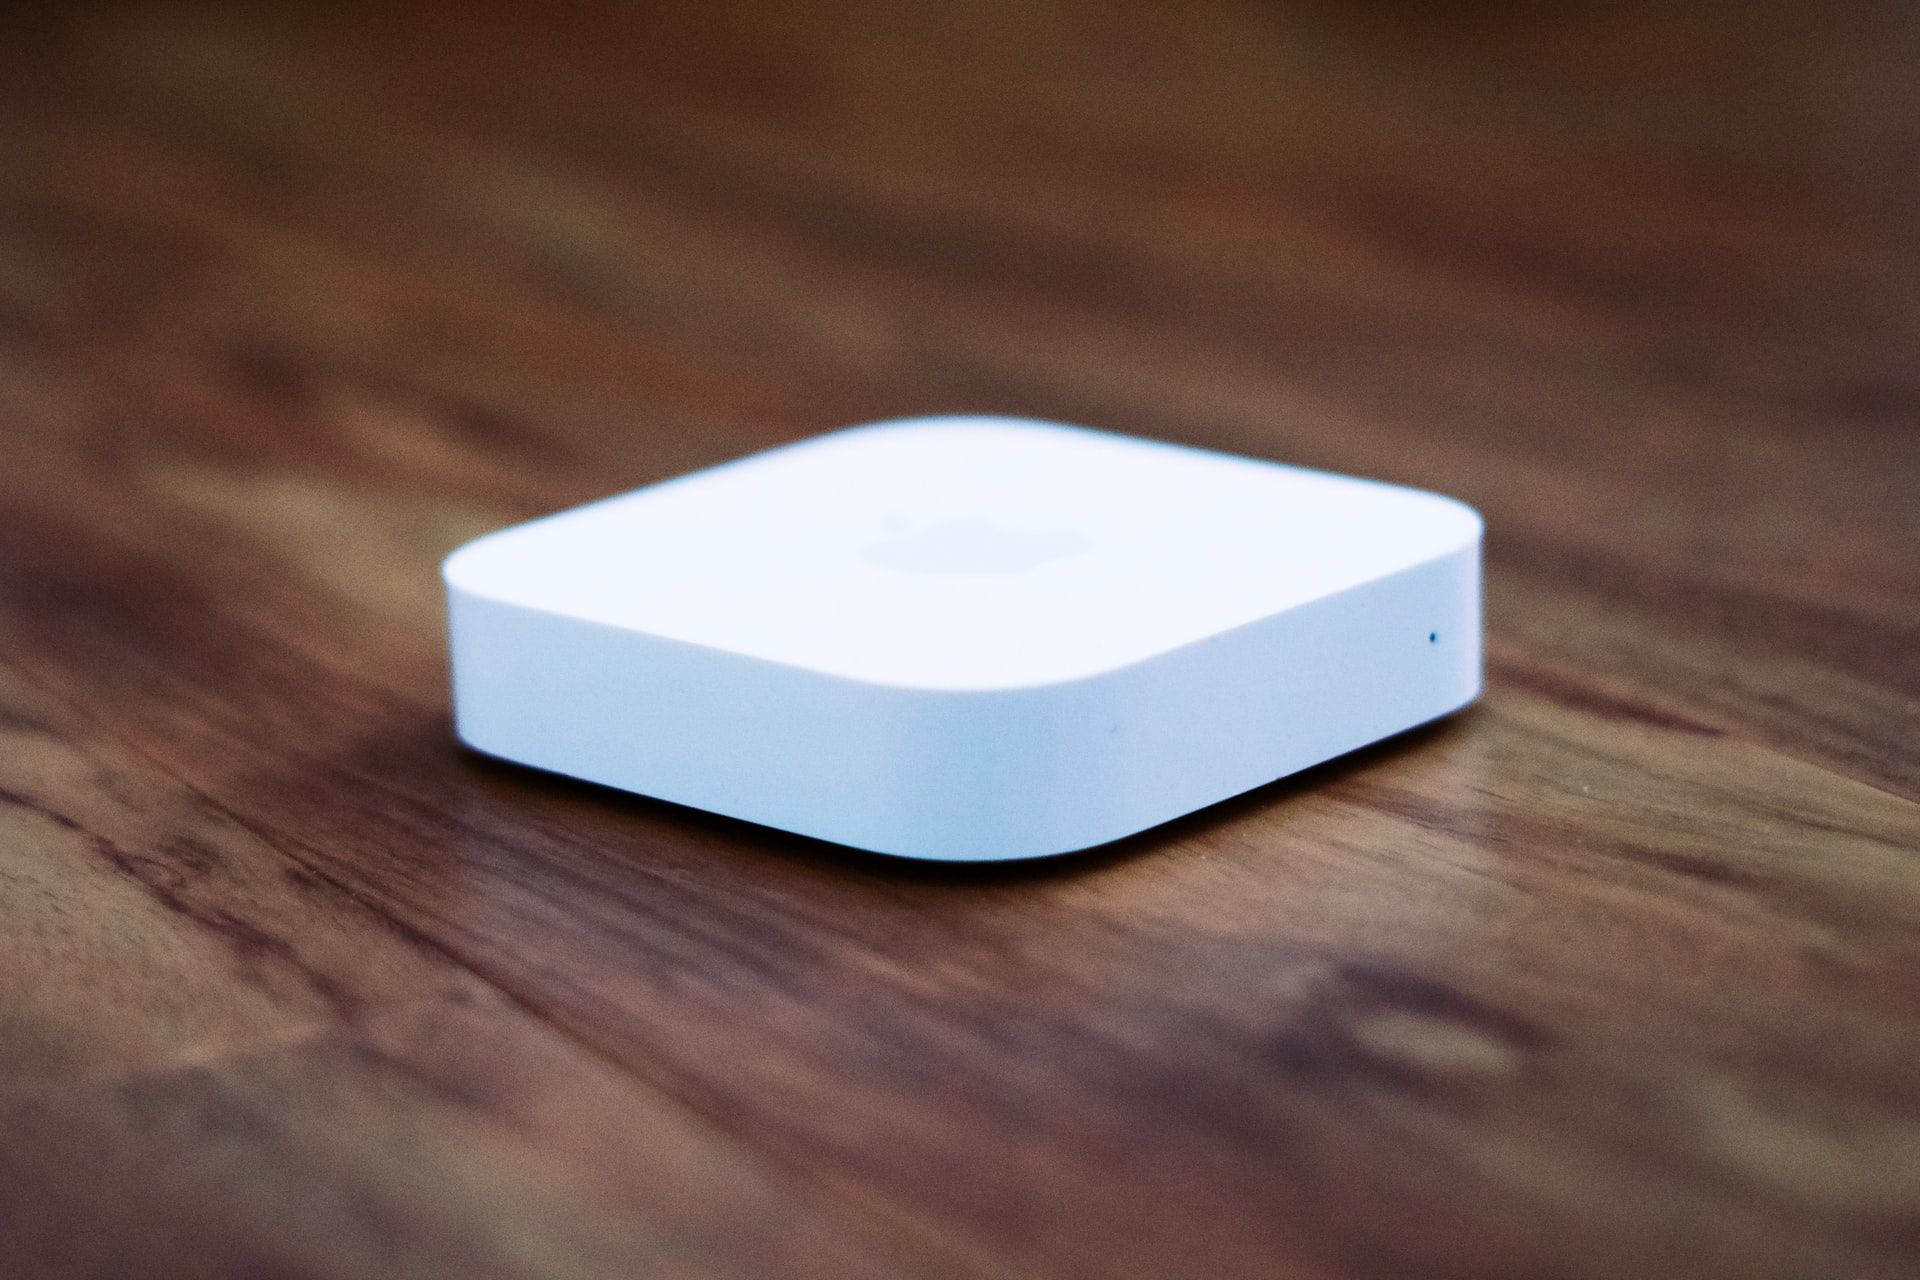 Image of a portable WiFi extender